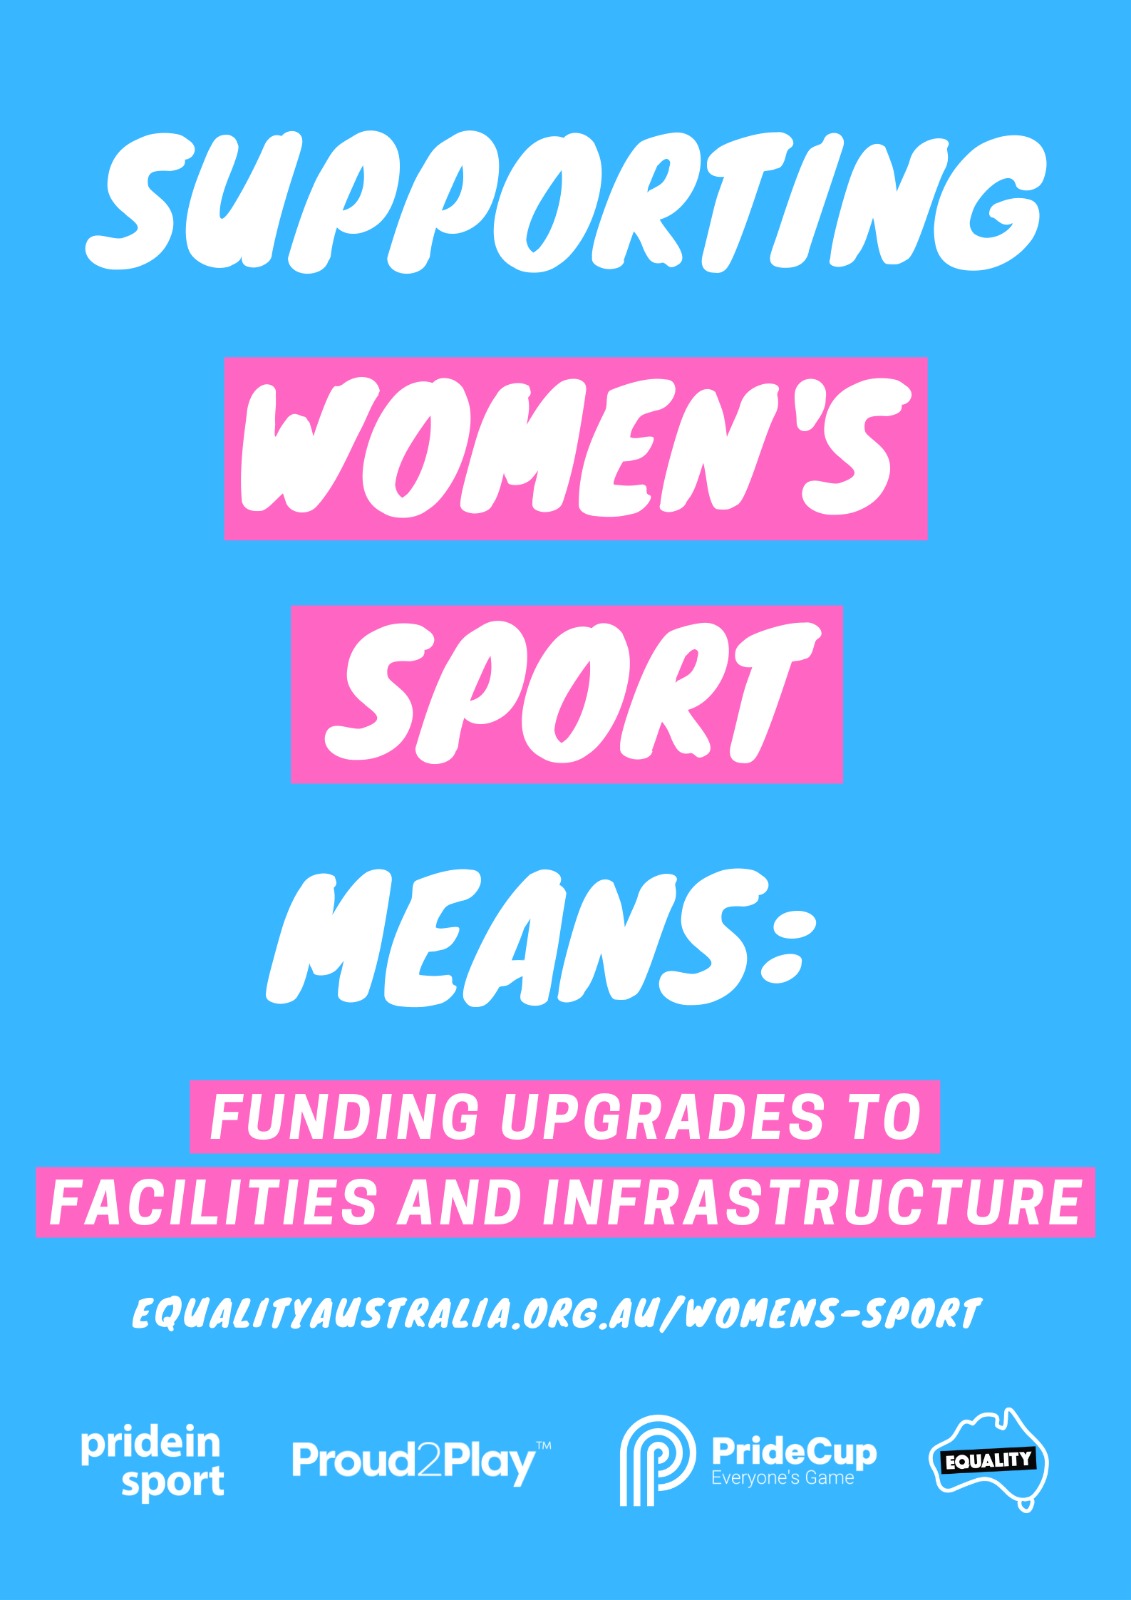 Supporting women's sport means funding upgrades to facilities and infrastructure